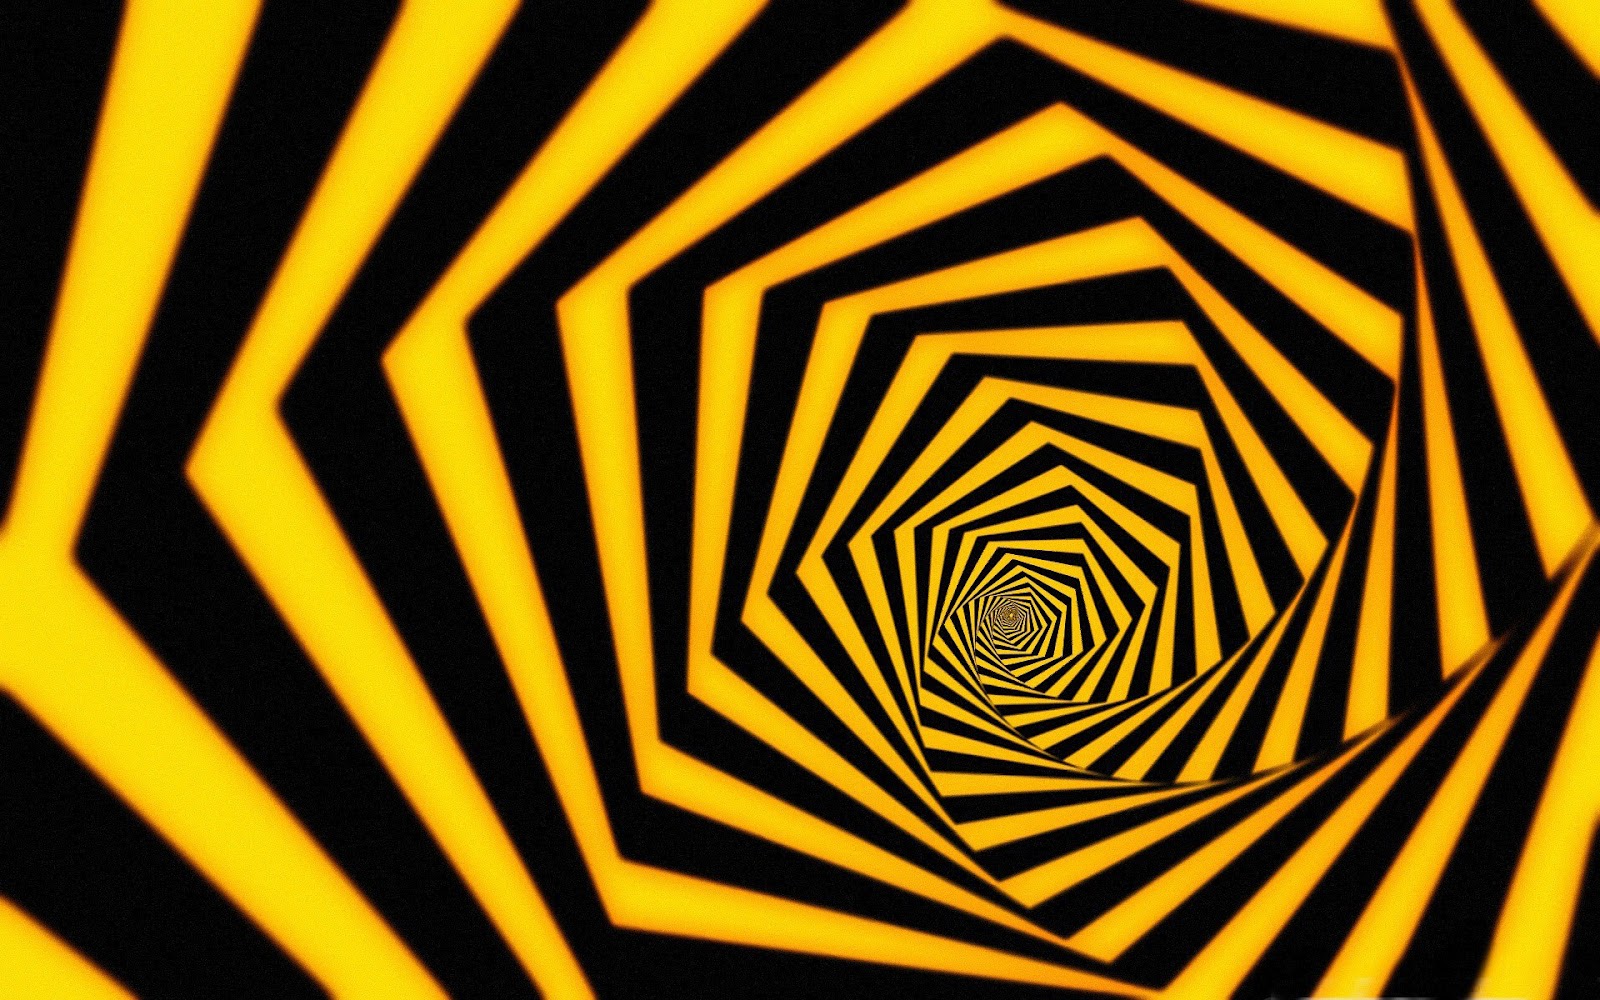 Share Optical Illusions Wallpaper Gallery To The